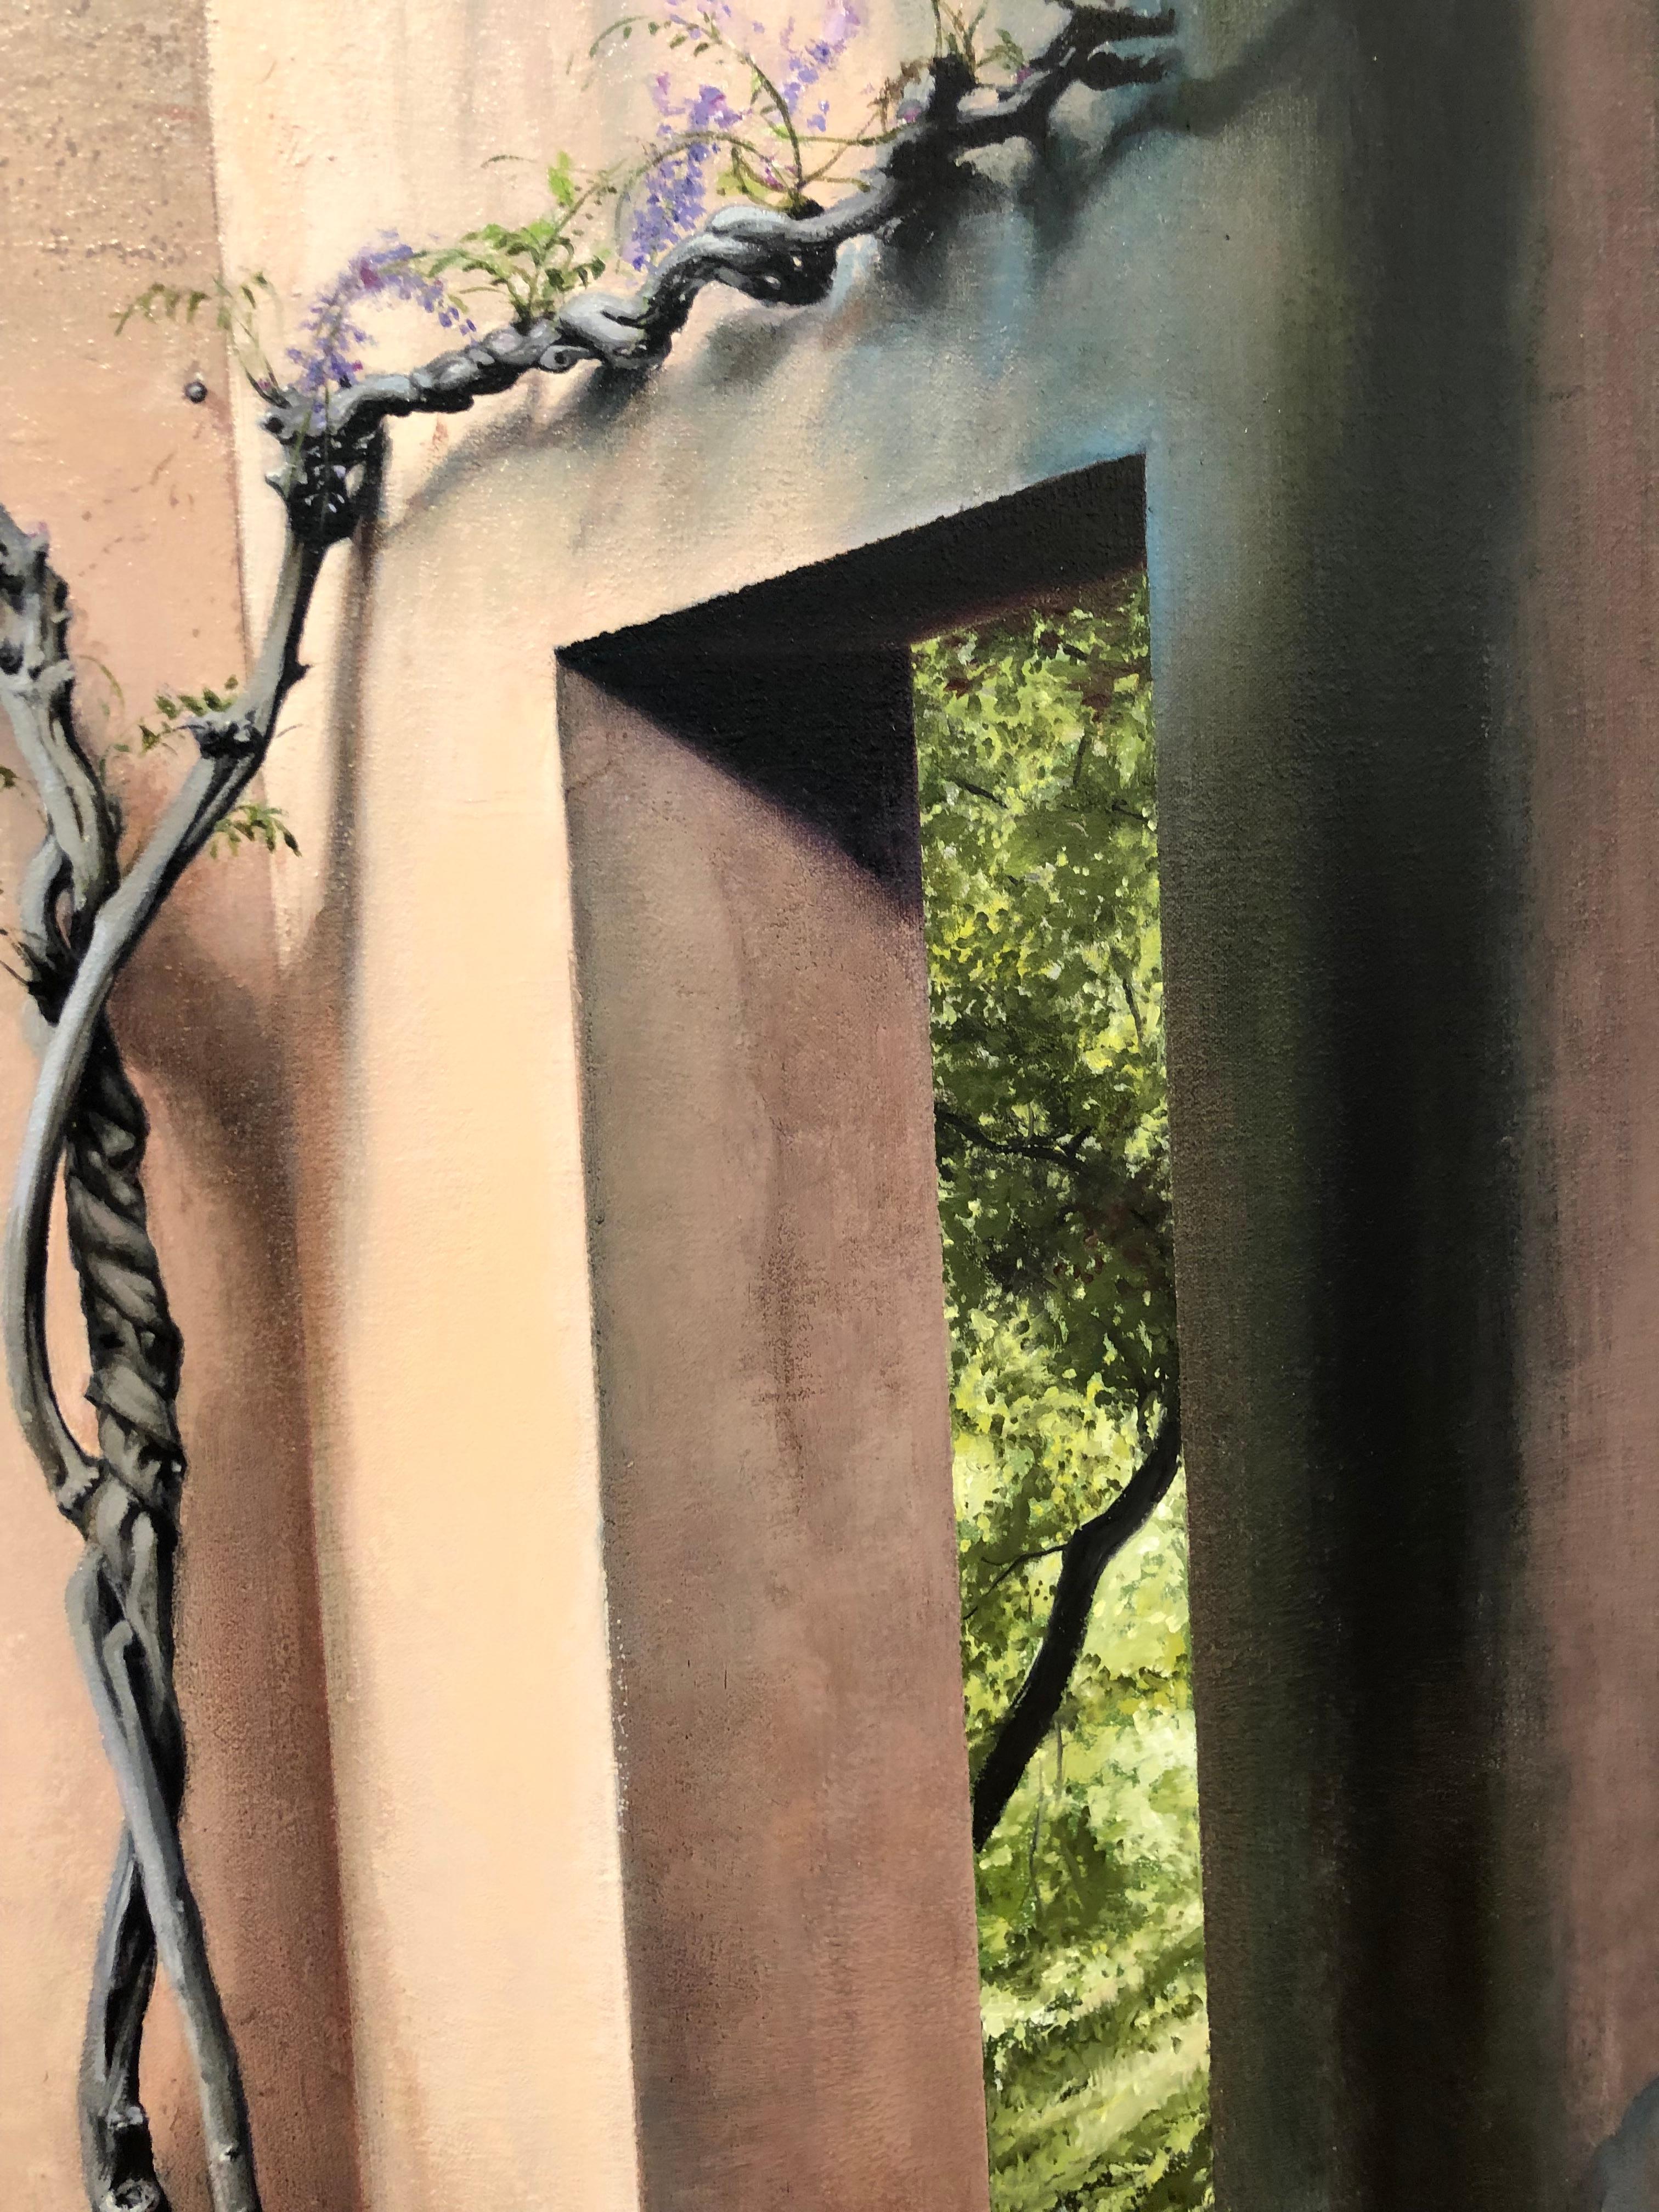 Artigas Spring - Landscape with Flowering Wisteria and Architectural Elements - Contemporary Painting by Carol Pylant